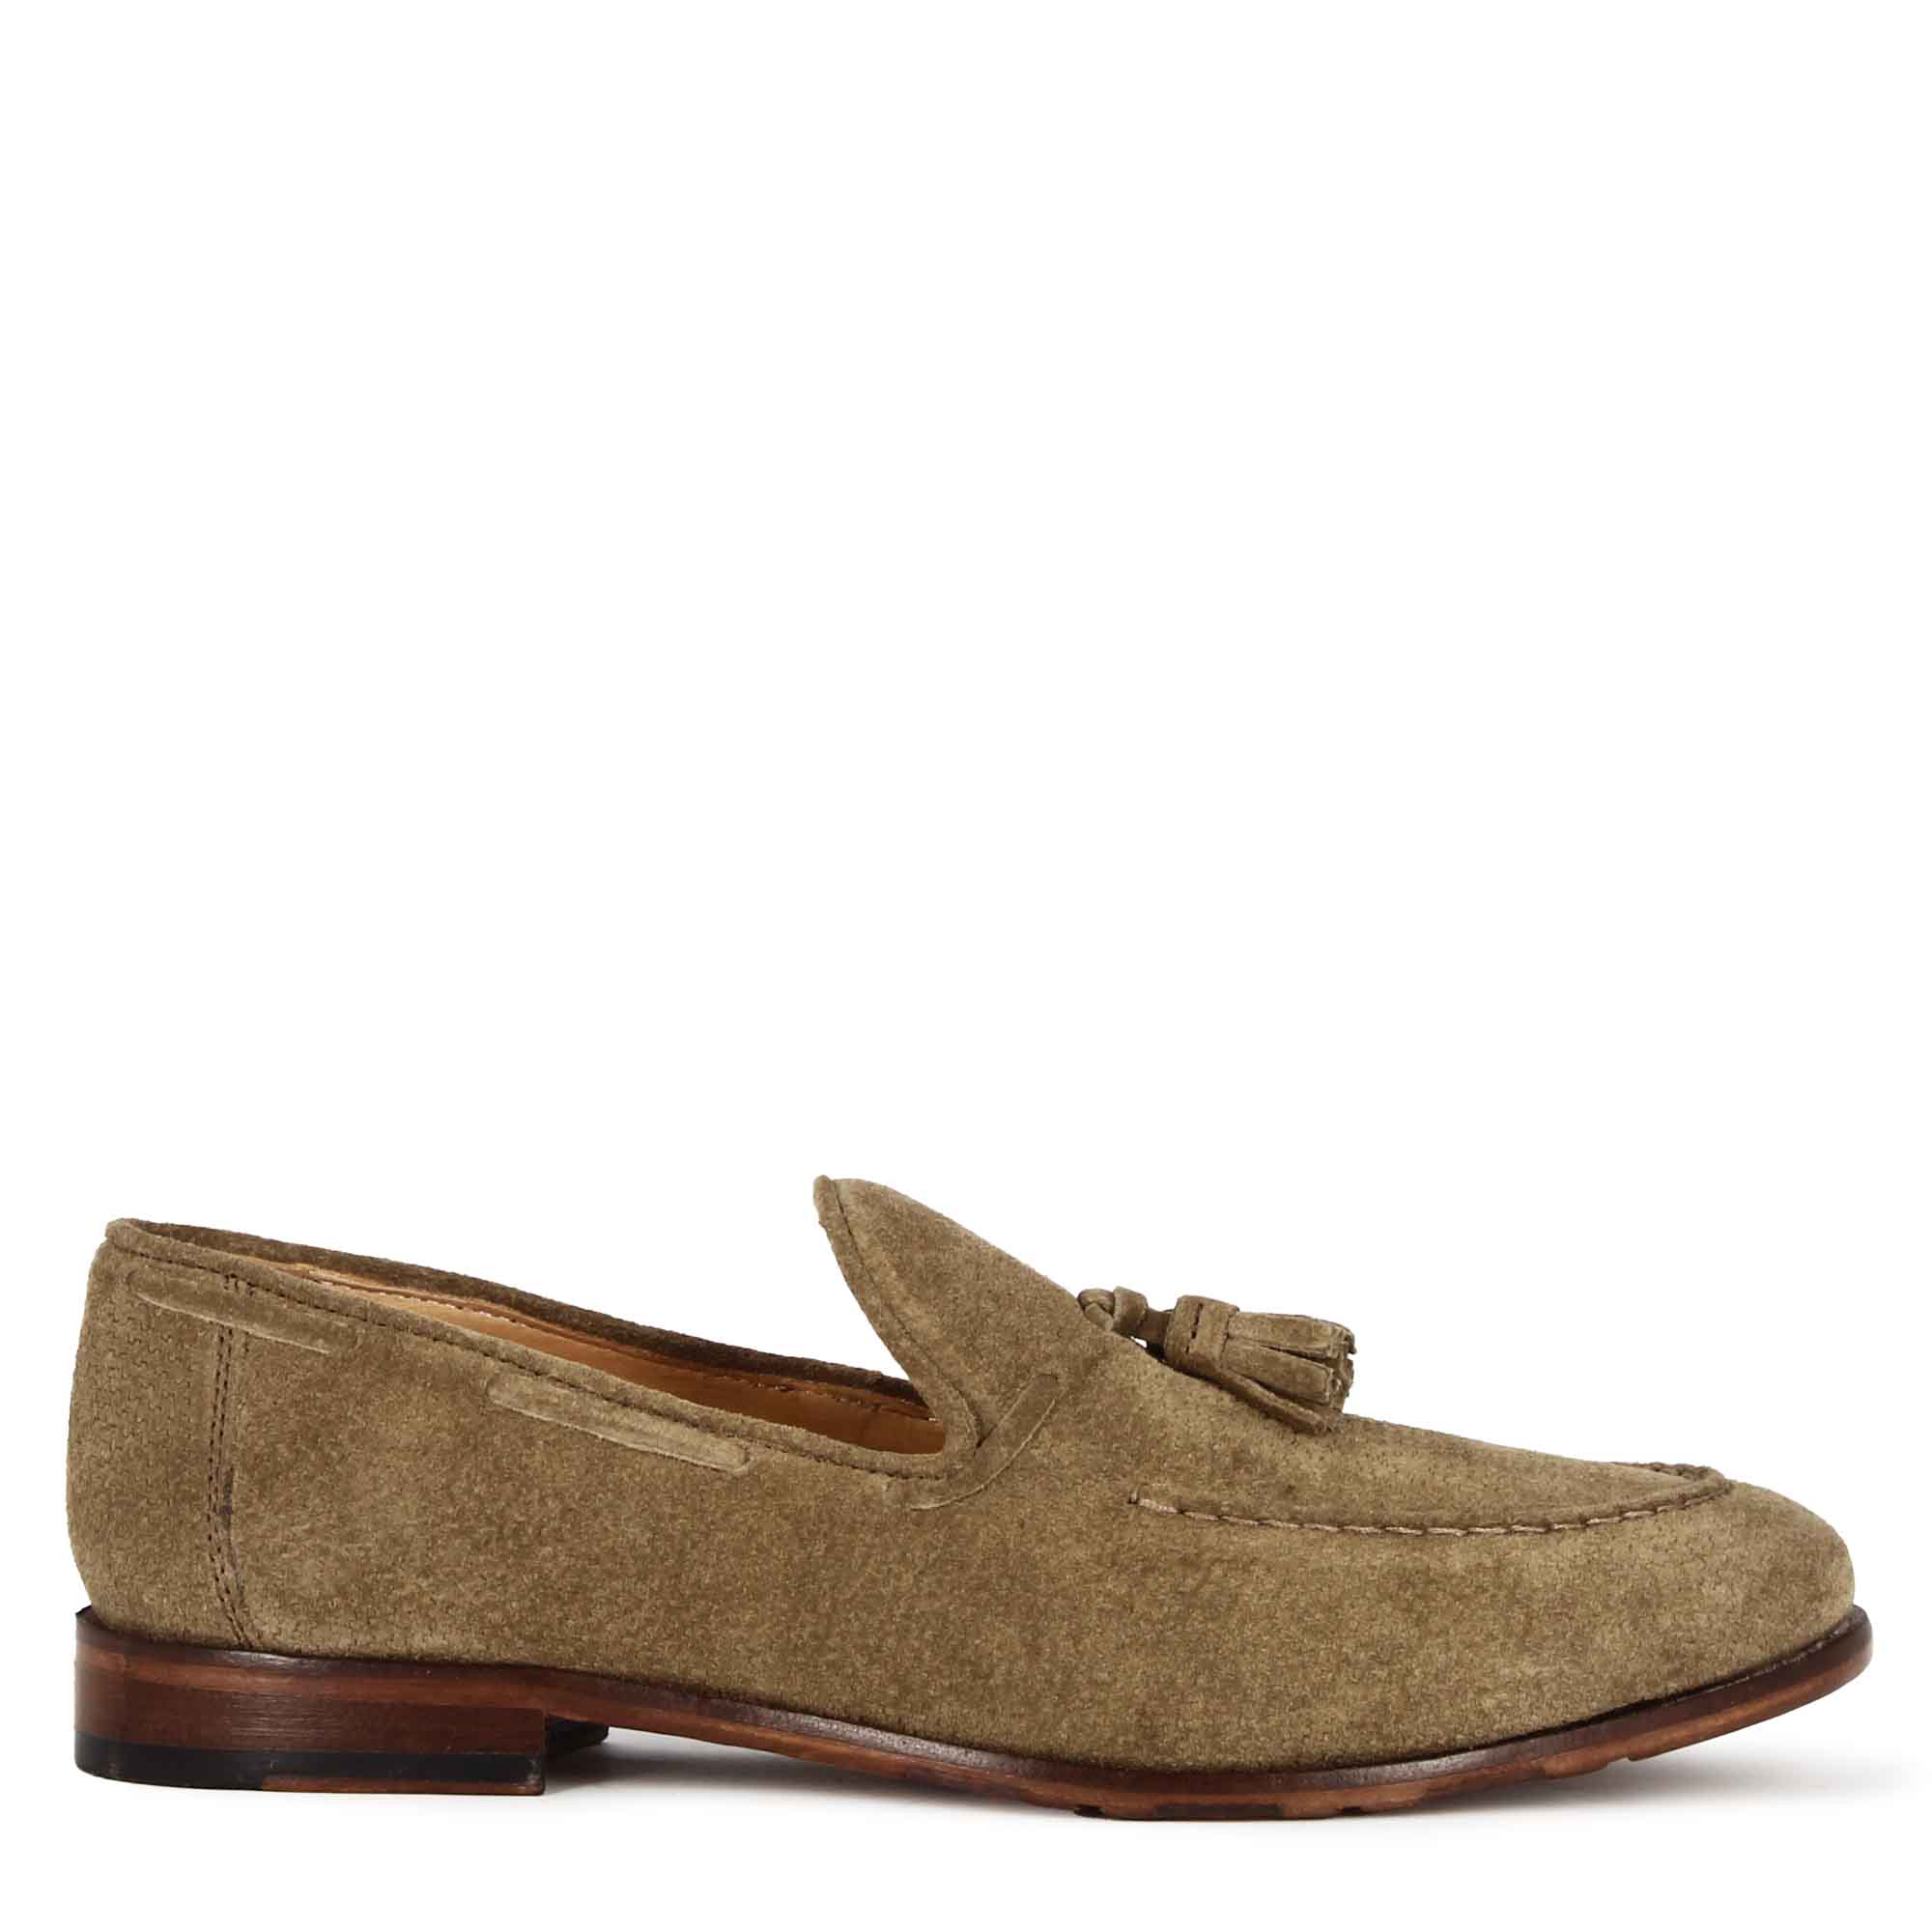 Suede Moccasin with Beige Tassels